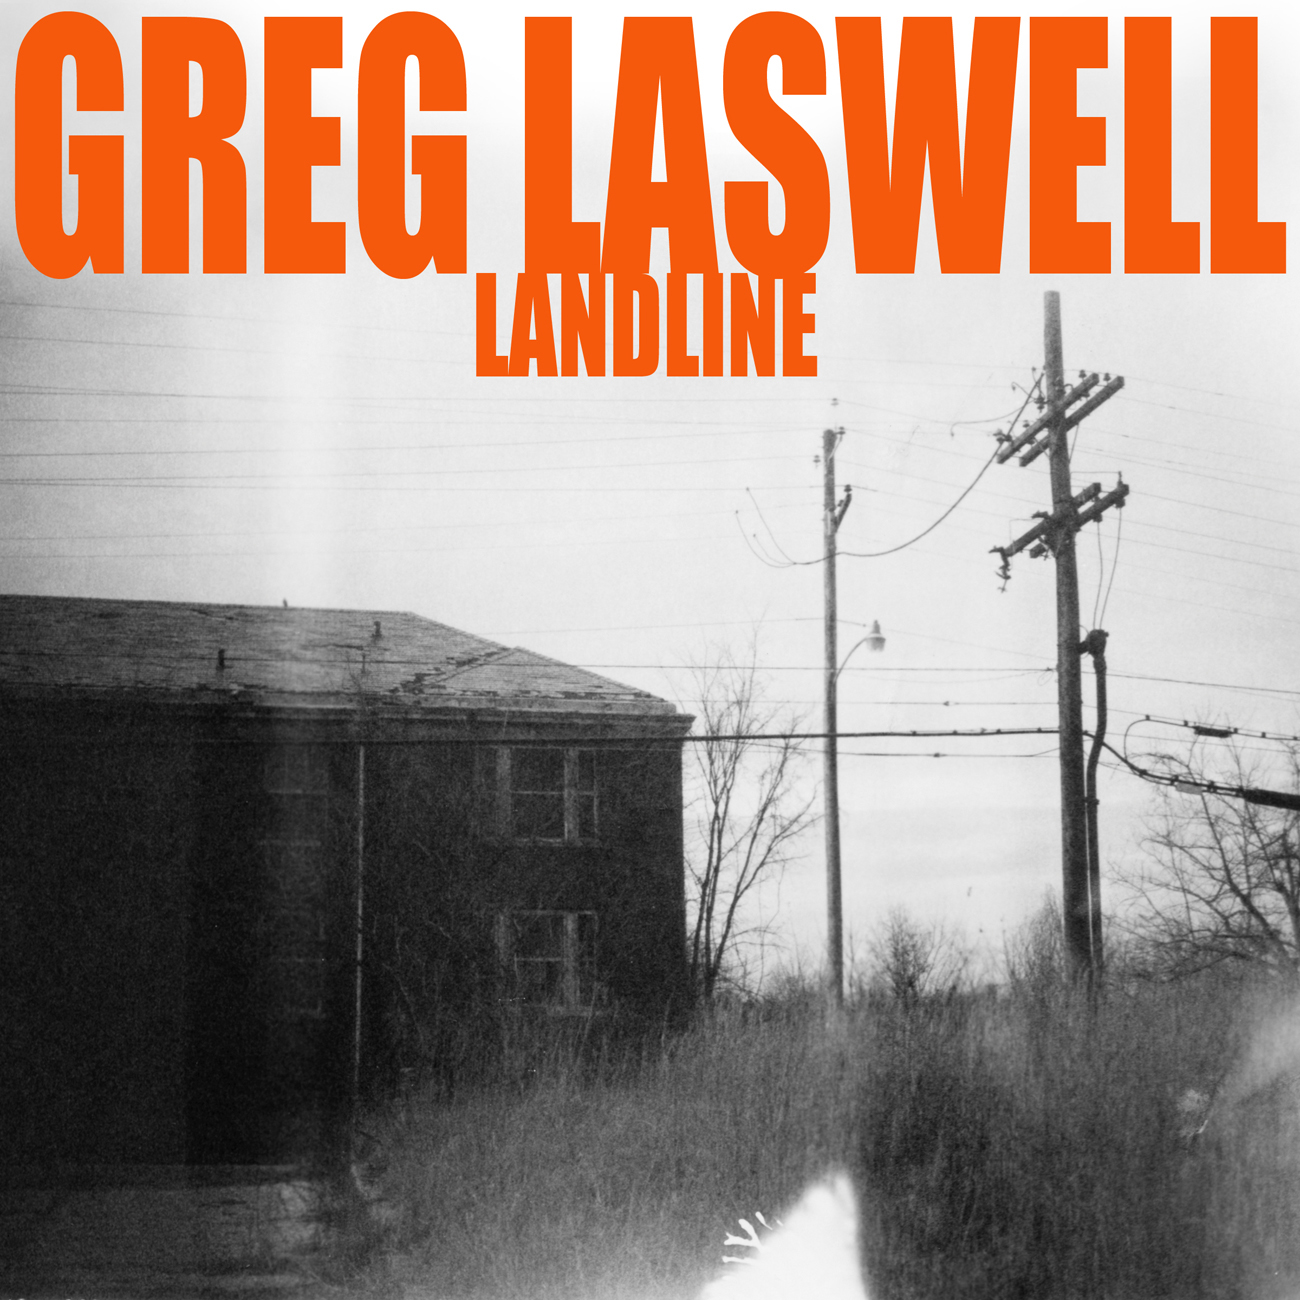 News Added Jan 22, 2012 Greg Laswell will be releasing his new album "Landline" on April 24th. Submitted By Arman